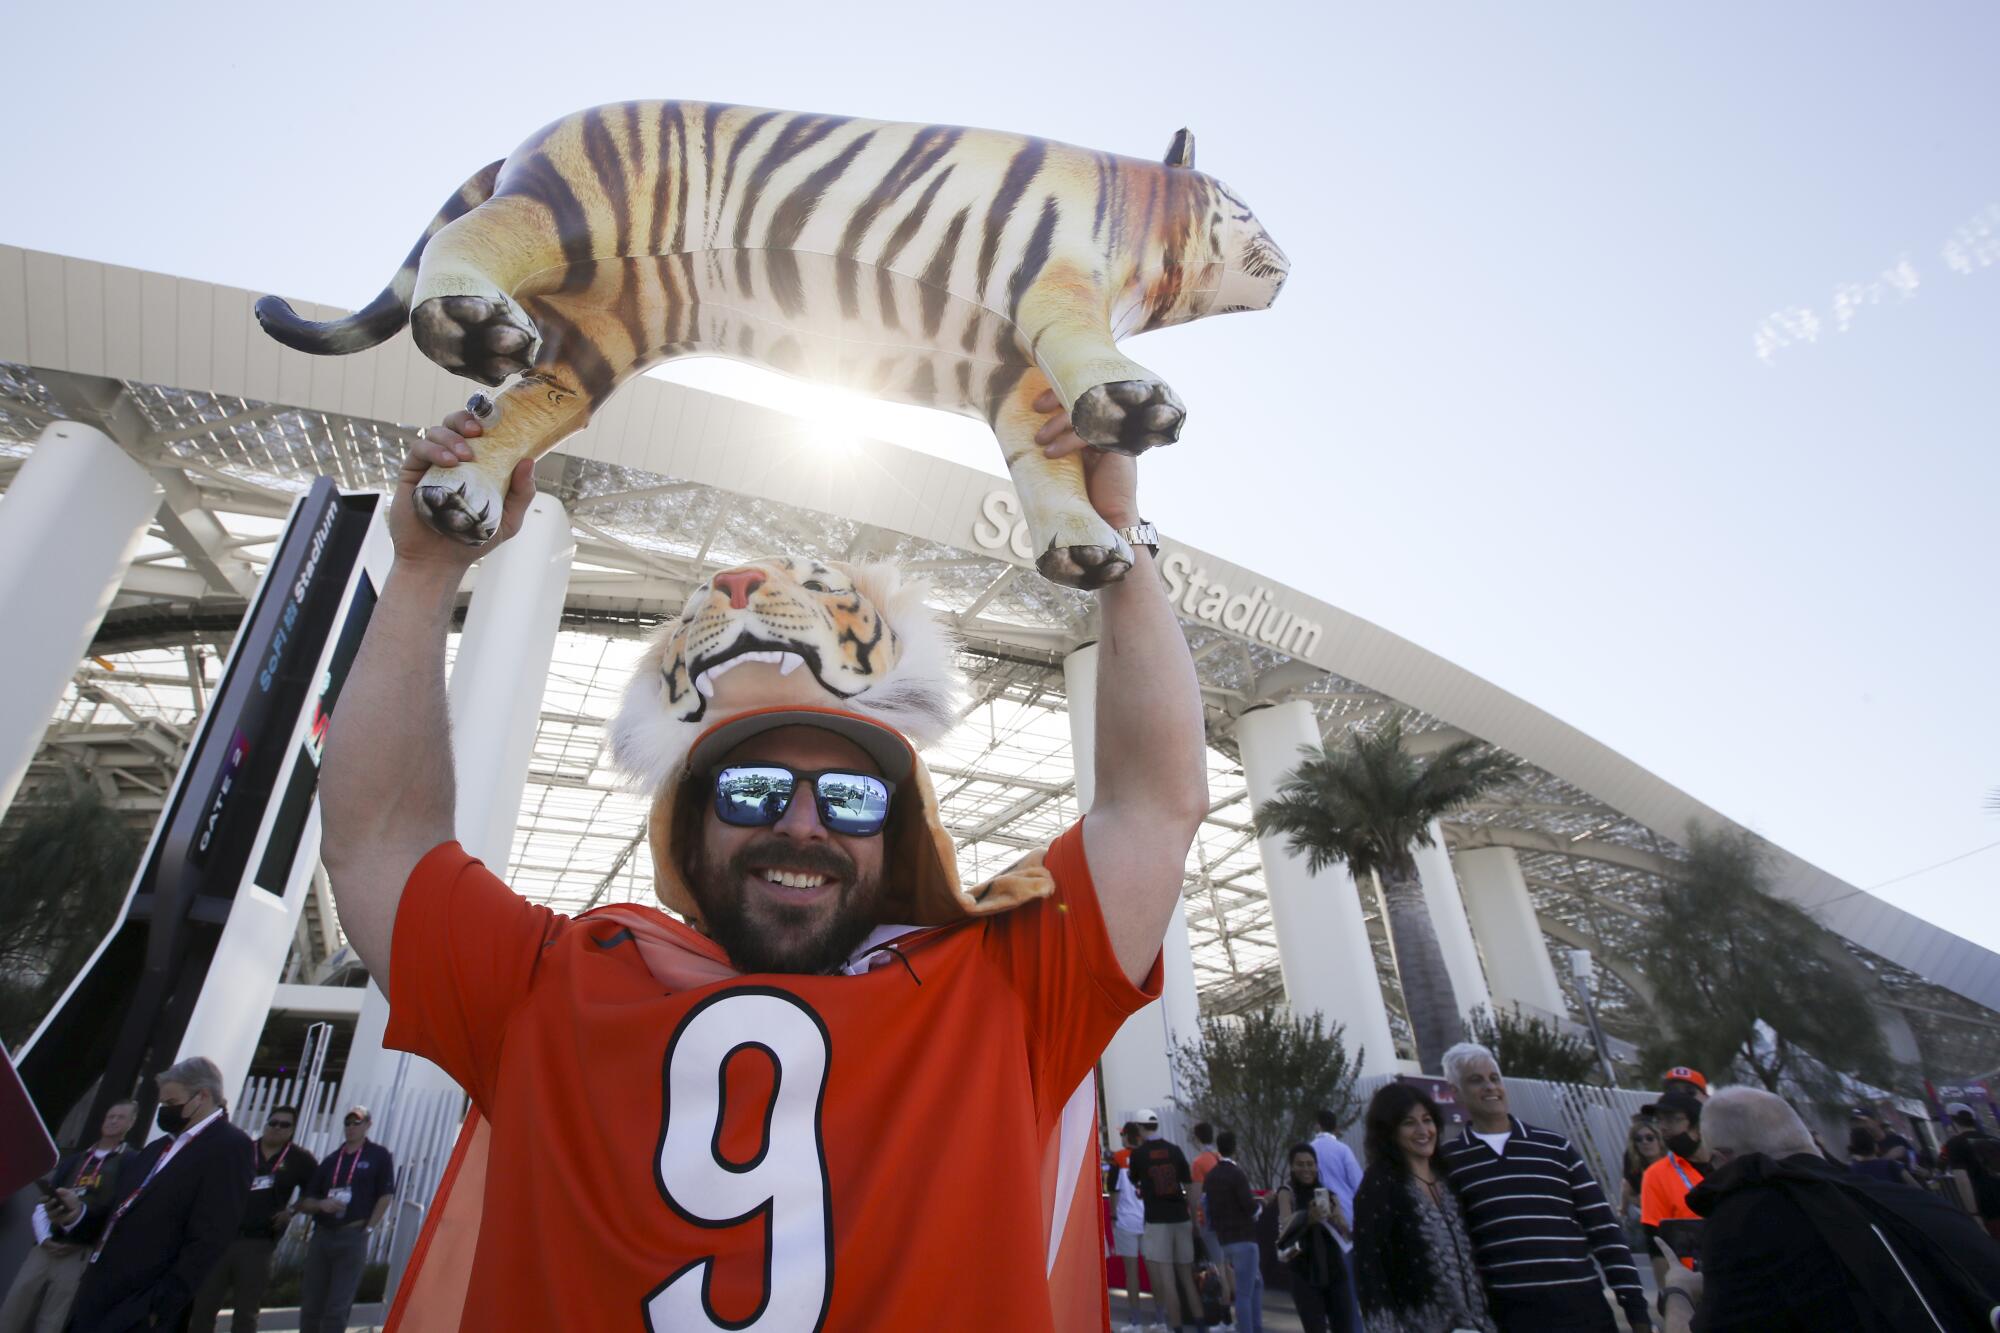 A Bengals fan holds up an inflated tiger outside of SoFi Stadium before Super Bowl LVI.